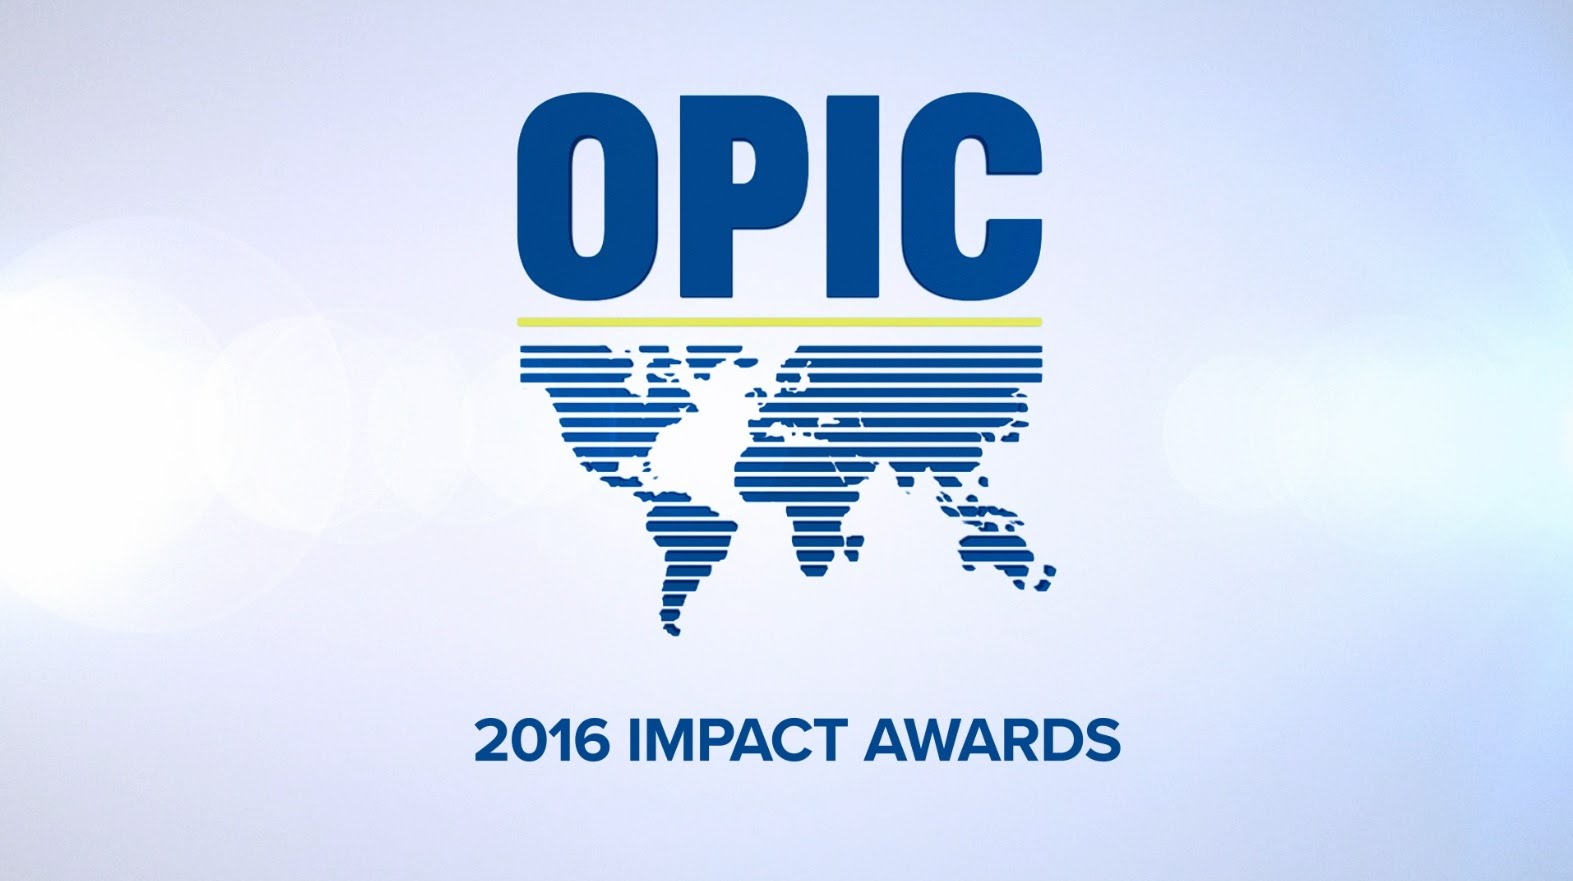 SmartKargo was honored at the 2016 OPIC Impact Awards for Excellence